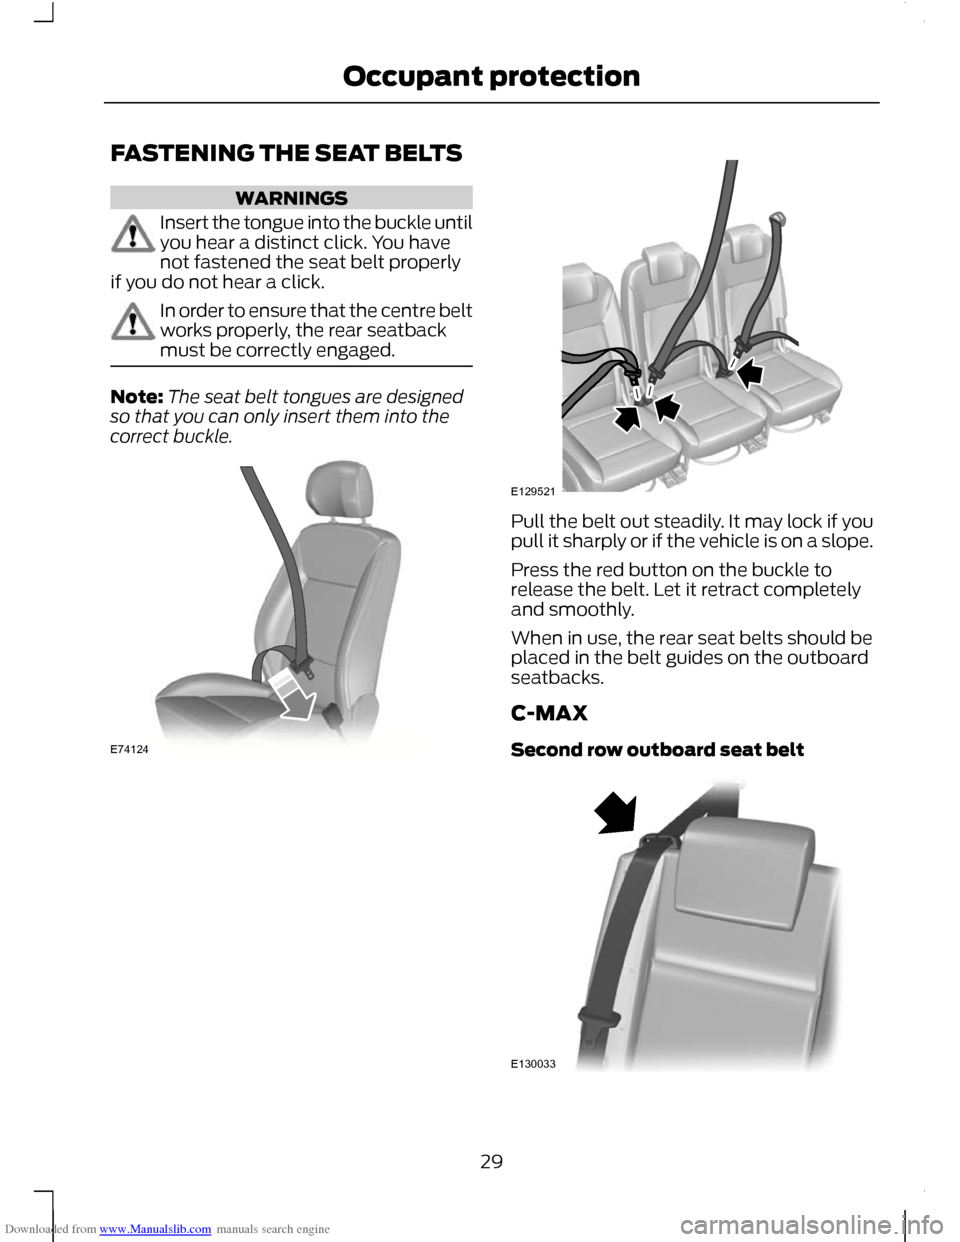 FORD C MAX 2011 2.G User Guide Downloaded from www.Manualslib.com manuals search engine FASTENING THE SEAT BELTS
WARNINGS
Insert the tongue into the buckle until
you hear a distinct click. You have
not fastened the seat belt proper